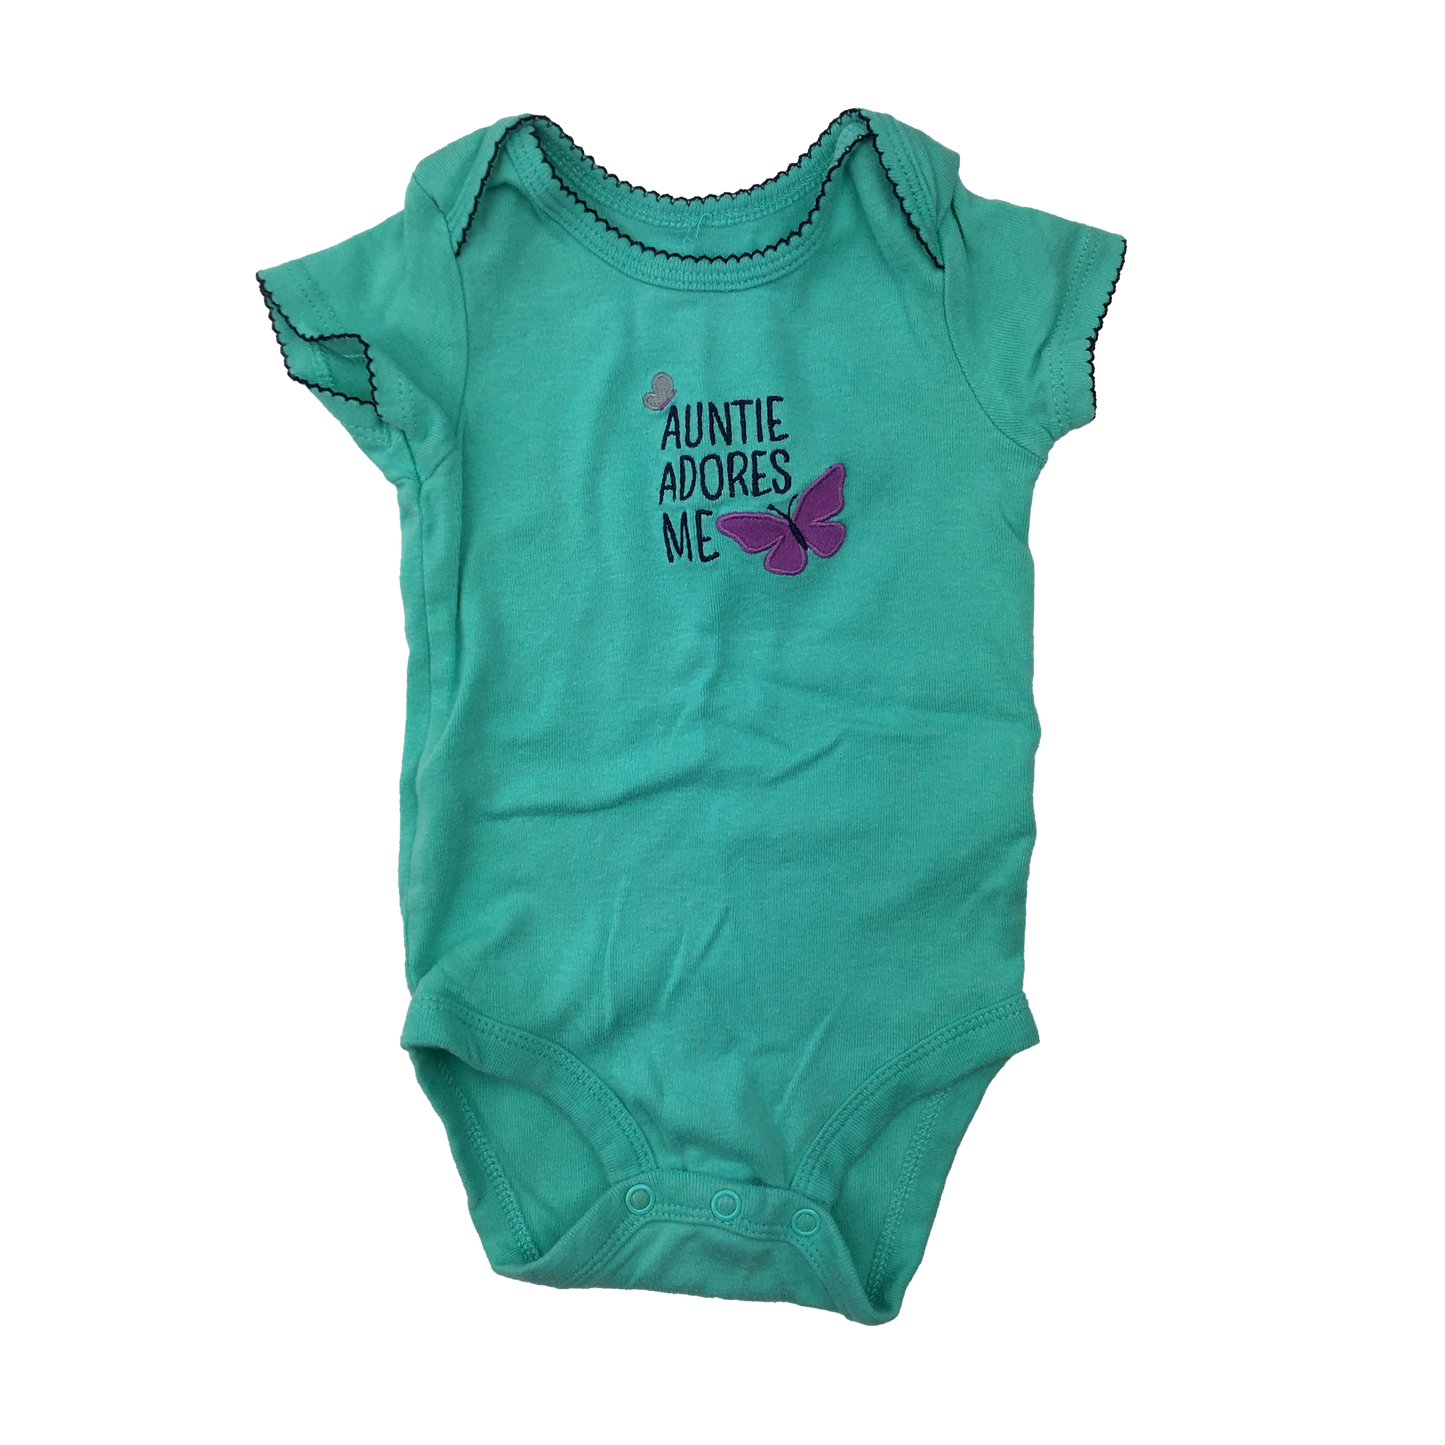 Carter's Turquoise Onesie "Auntie Adores Me" with Butterflies 3M